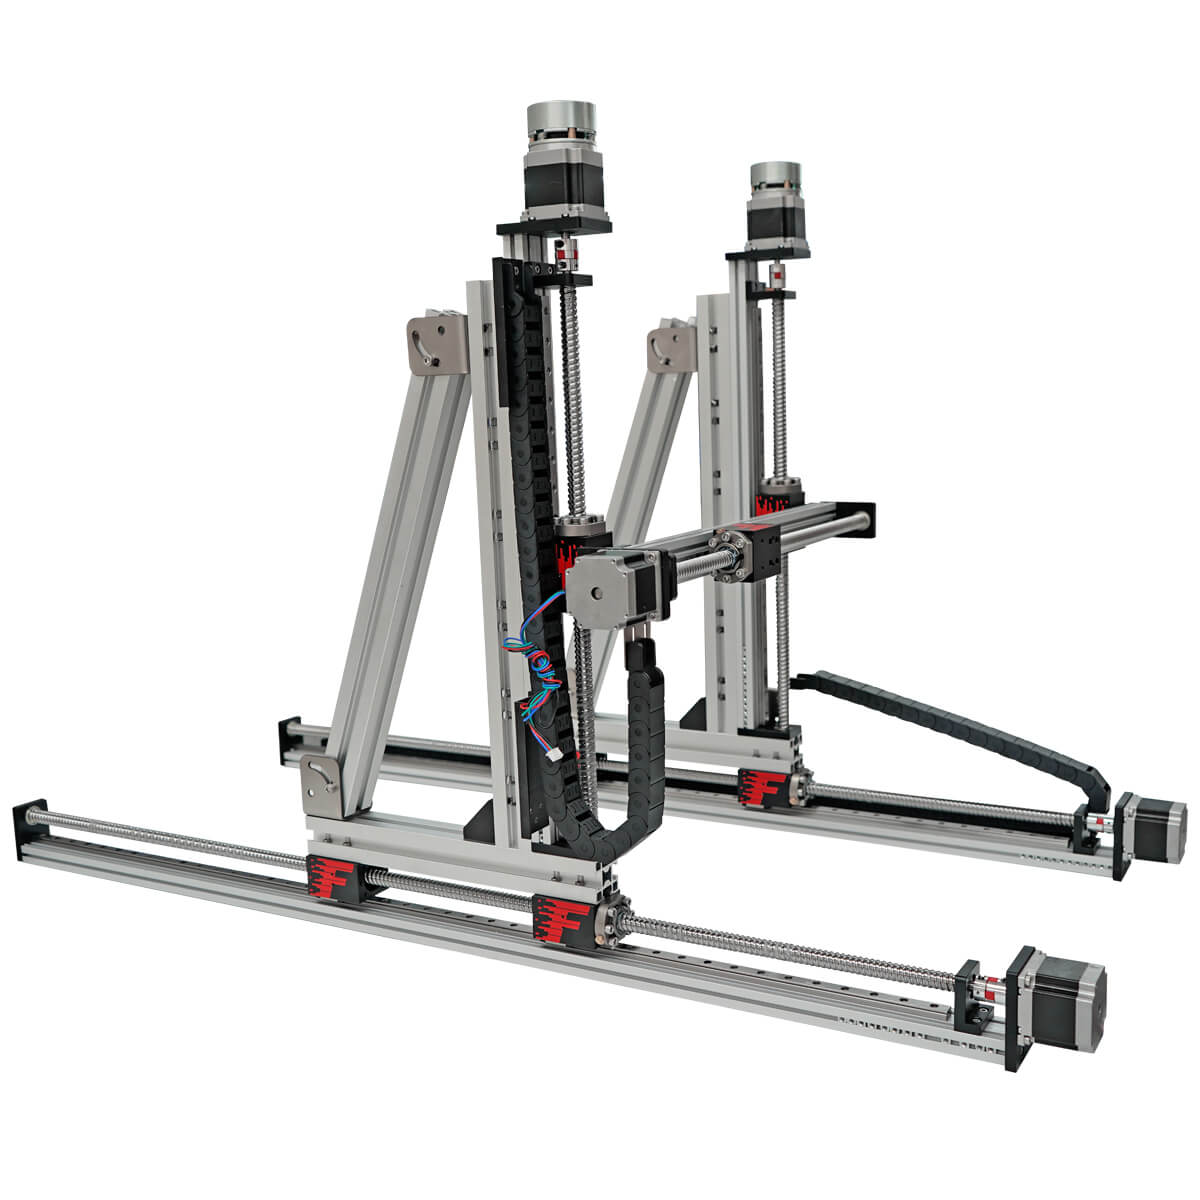 Double Z Axis Linear Table Ball Screw Gantry System Vertical Rail Guide